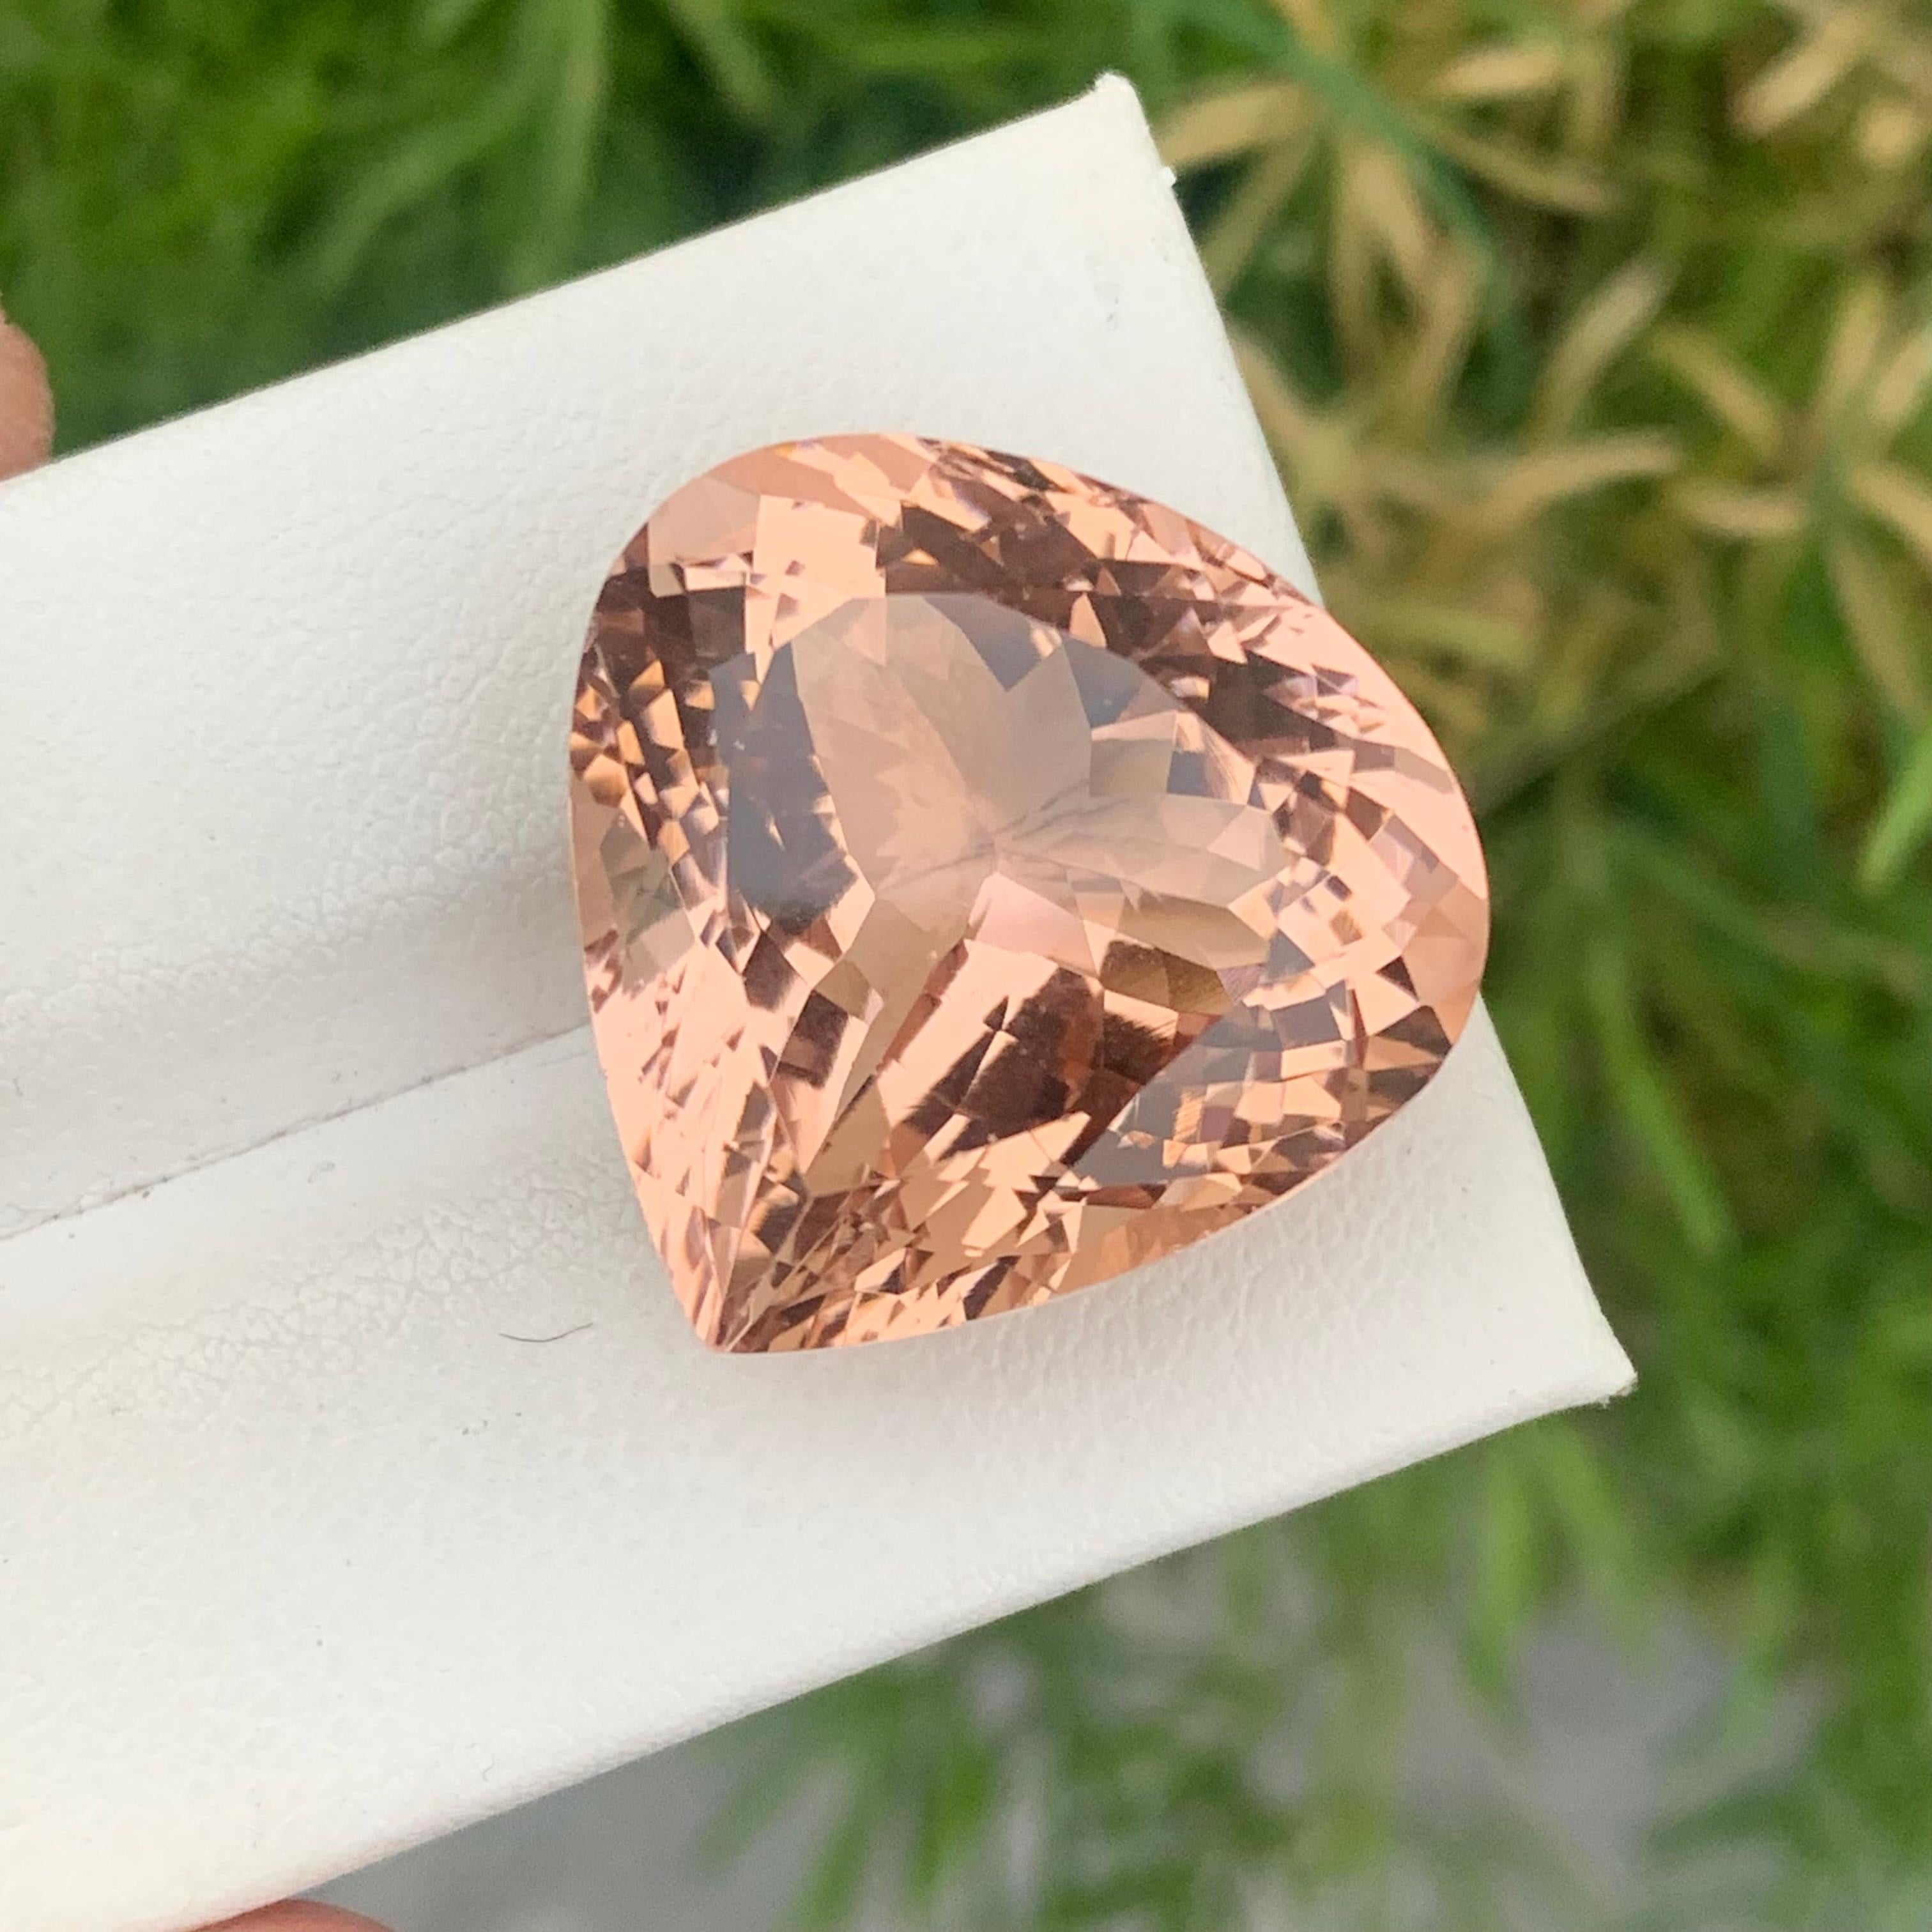 Gemstone Type : Morganite
Weight : 25 Carats
Dimensions : 25x24x11.8 Mm
Origin : Africa
Clarity : Eye Clean
Shape: Pear
Color: Peach
Certificate: On Demand
Morganite is believed to bring healing, compassion and promise to those who wear it.